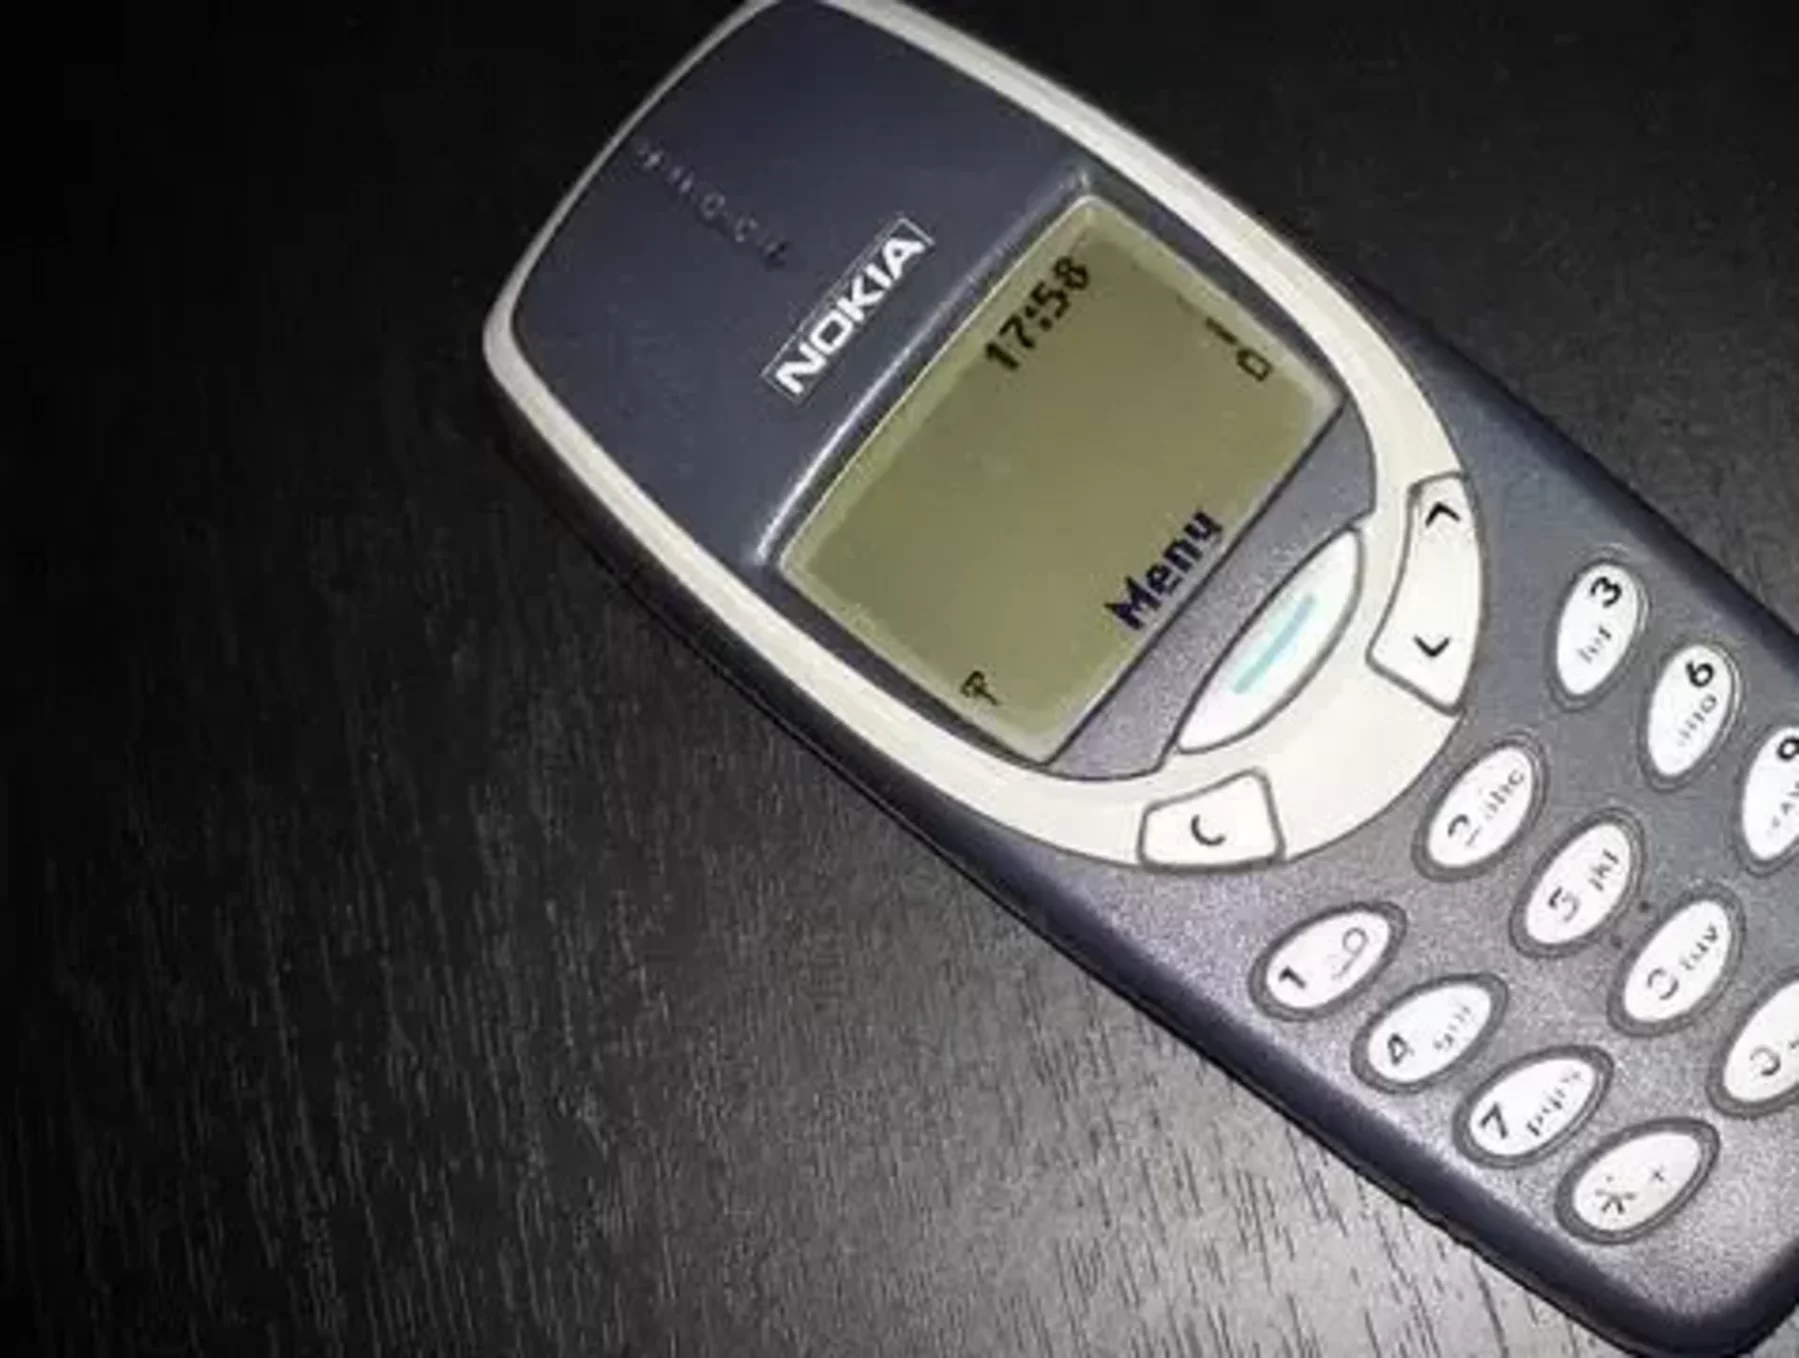 An Oral History of 'Snake' on Nokia